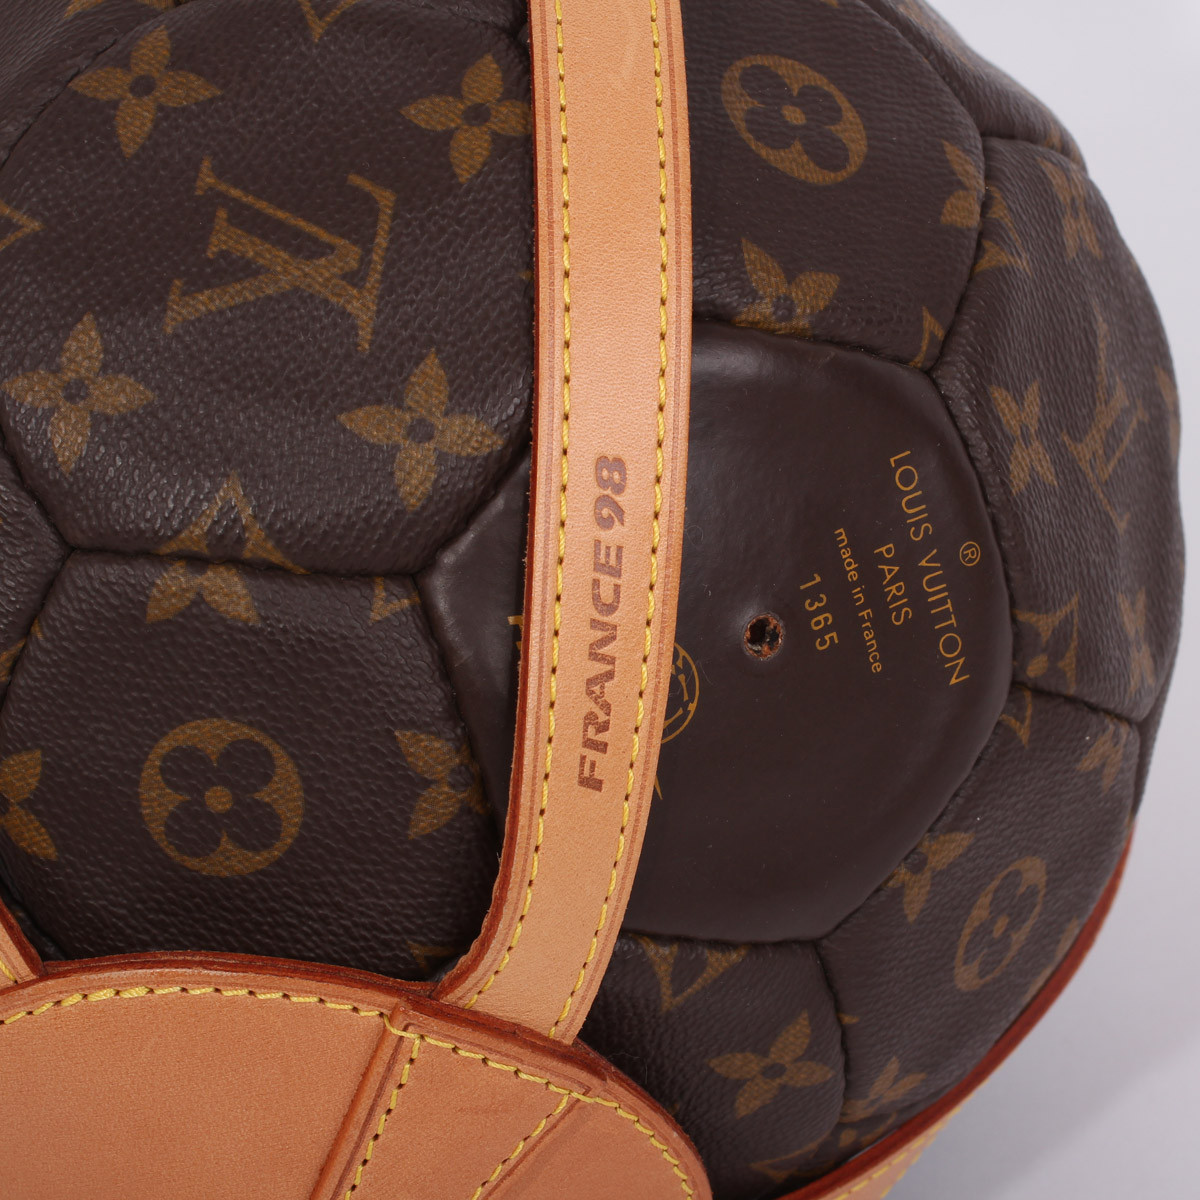 A limited edition monogrammed soccer ball with leather holder made by Louis  Vuitton for the World Cup in France in 1998. Together with a copy of  Rebonds, a limited edition Louis Vuitton